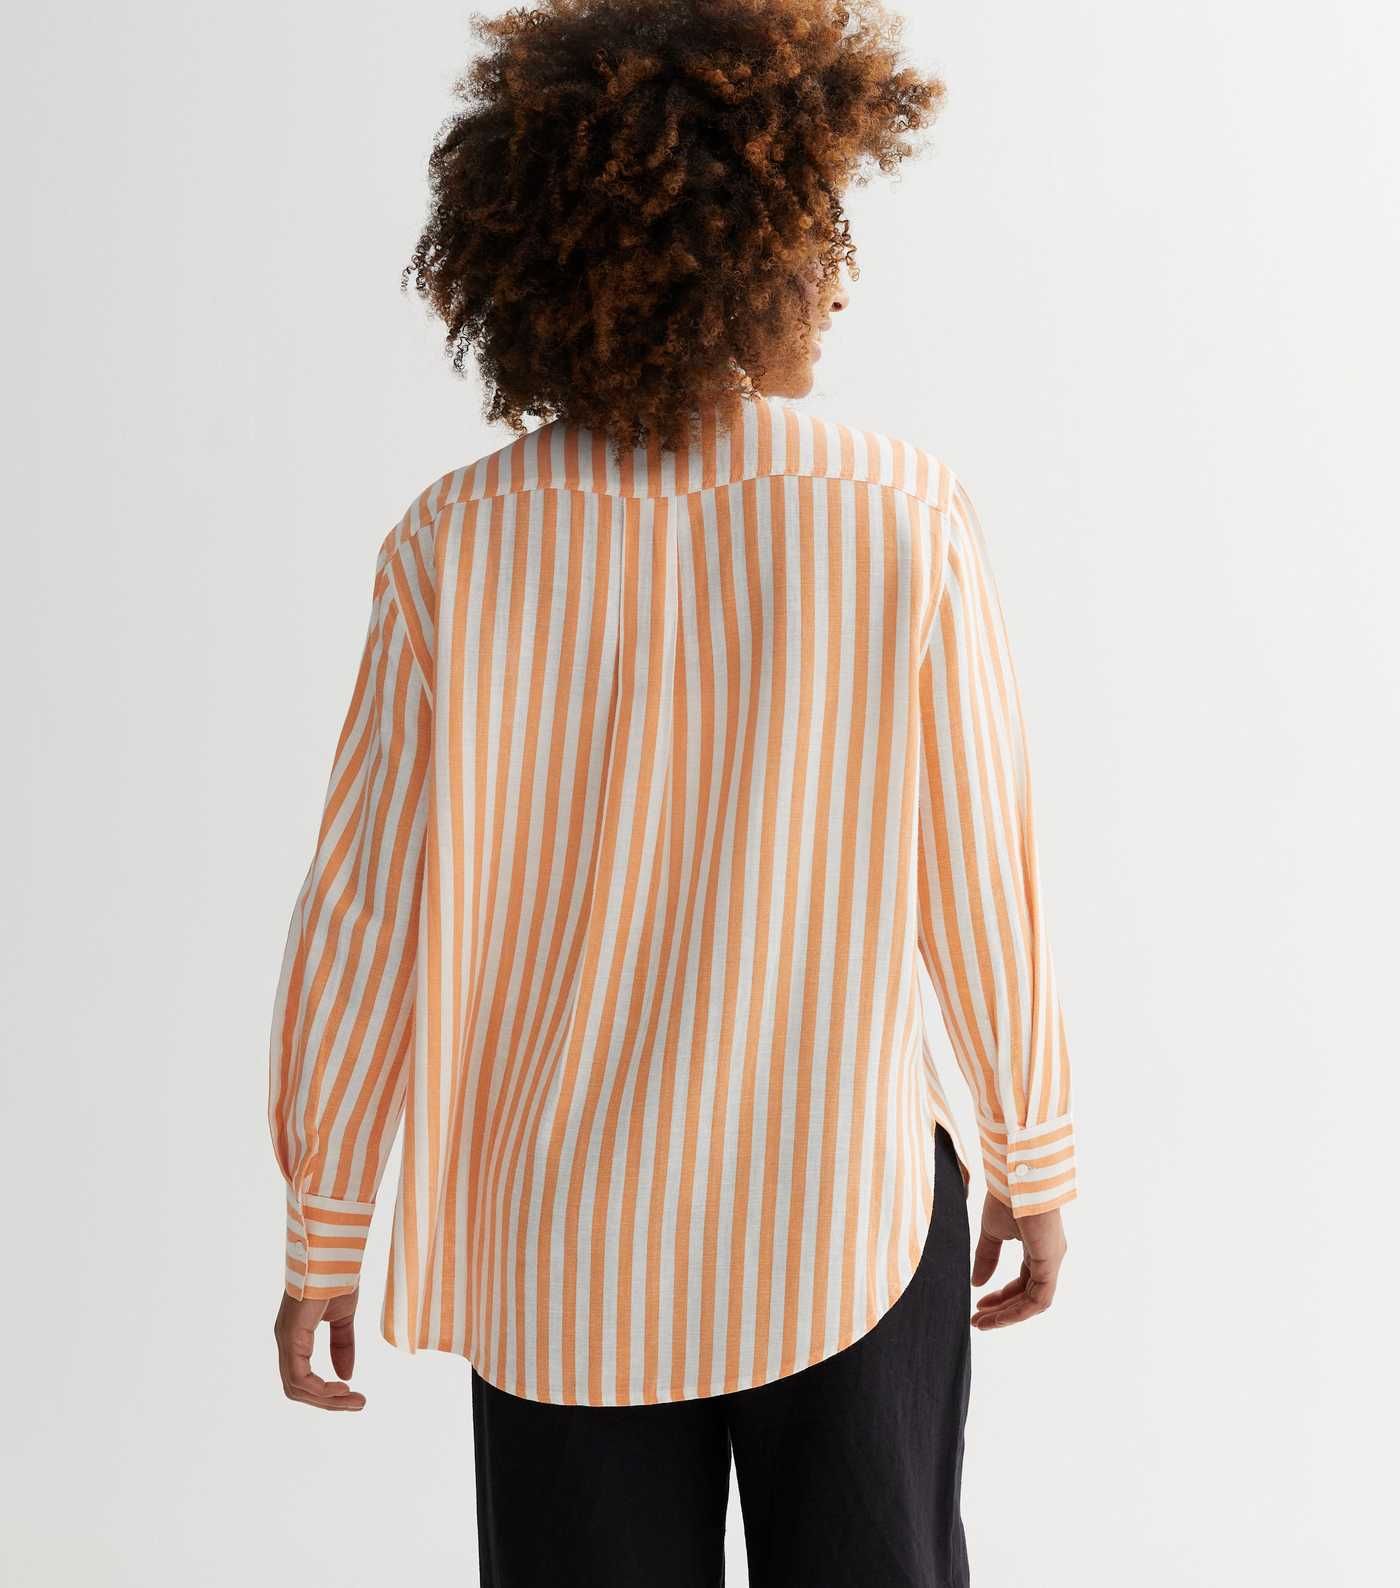 Orange Stripe Long Sleeve Shirt
						
						Add to Saved Items
						Remove from Saved Items | New Look (UK)